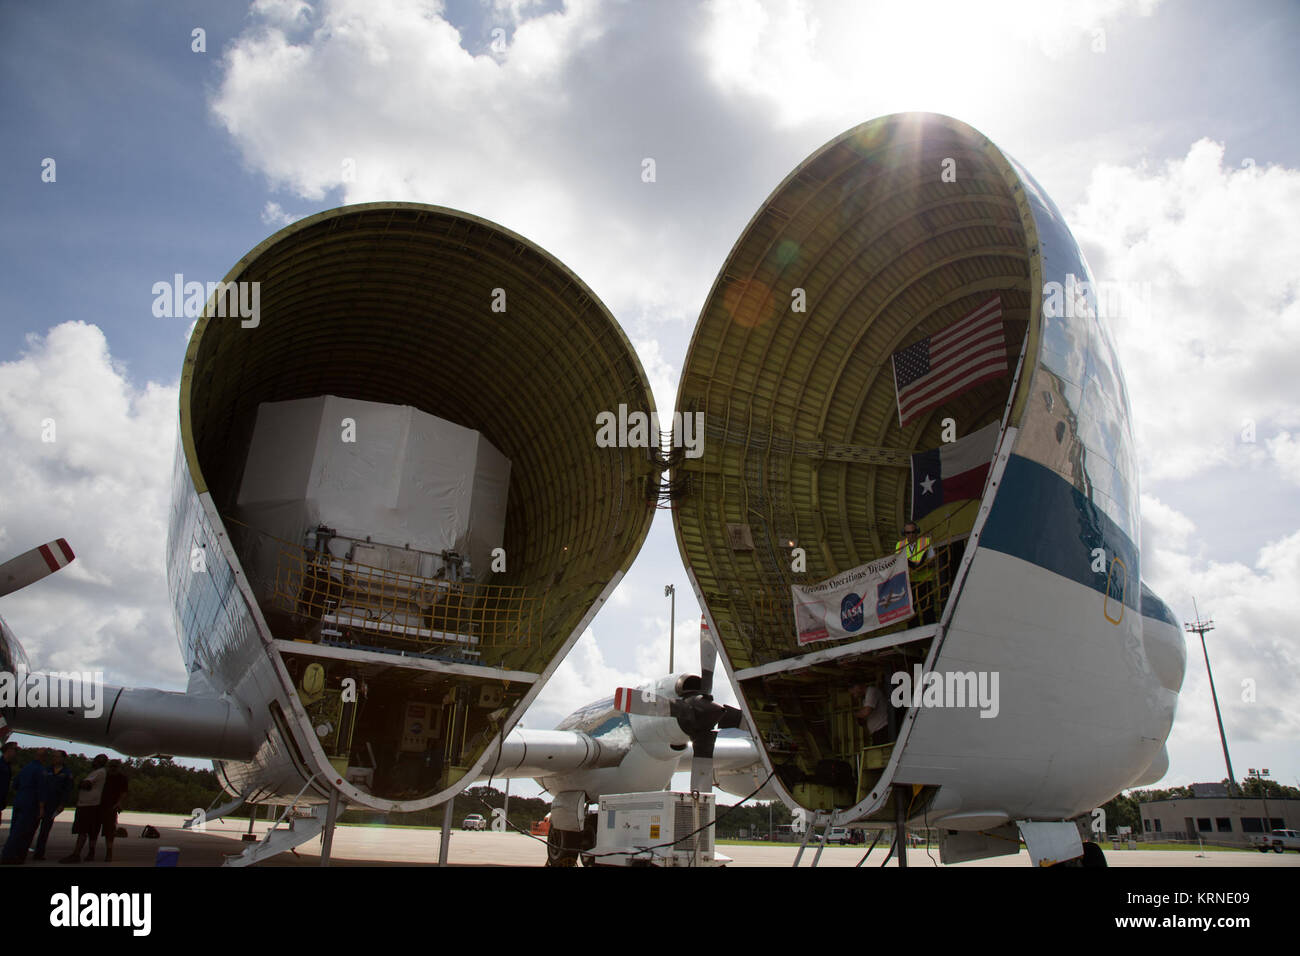 The Orion service module structural test article for Exploration Mission-1 (EM-1), built by the European Space Agency, is secured inside NASA's Super Guppy aircraft at Kennedy Space Center's Shuttle Landing Facility, managed by Space Florida. The module will be shipped to Lockheed Martin's Denver facility to undergo testing. The Orion spacecraft will launch atop the agency's Space Launch System rocket on EM-1 in 2019. NASA 941 Super Guppy lands to pick up EM-1 Orion Service Module structural test article (KSC-20170623-PH-GEB01 0025) Stock Photo